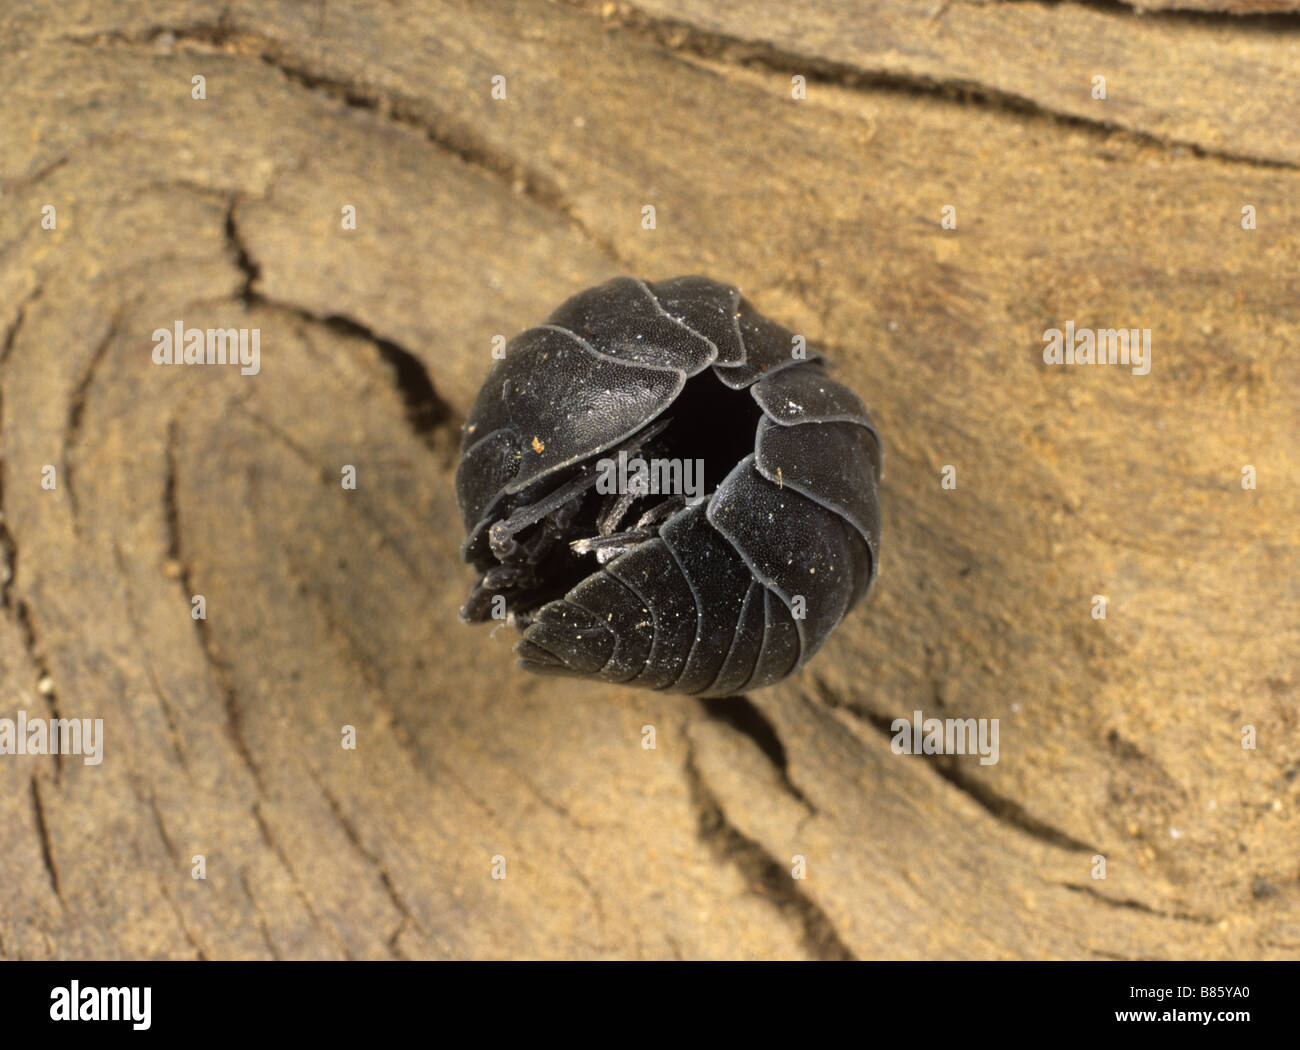 Pill woodlouse Armadillium vulgare in defensive rolled up pill position Stock Photo